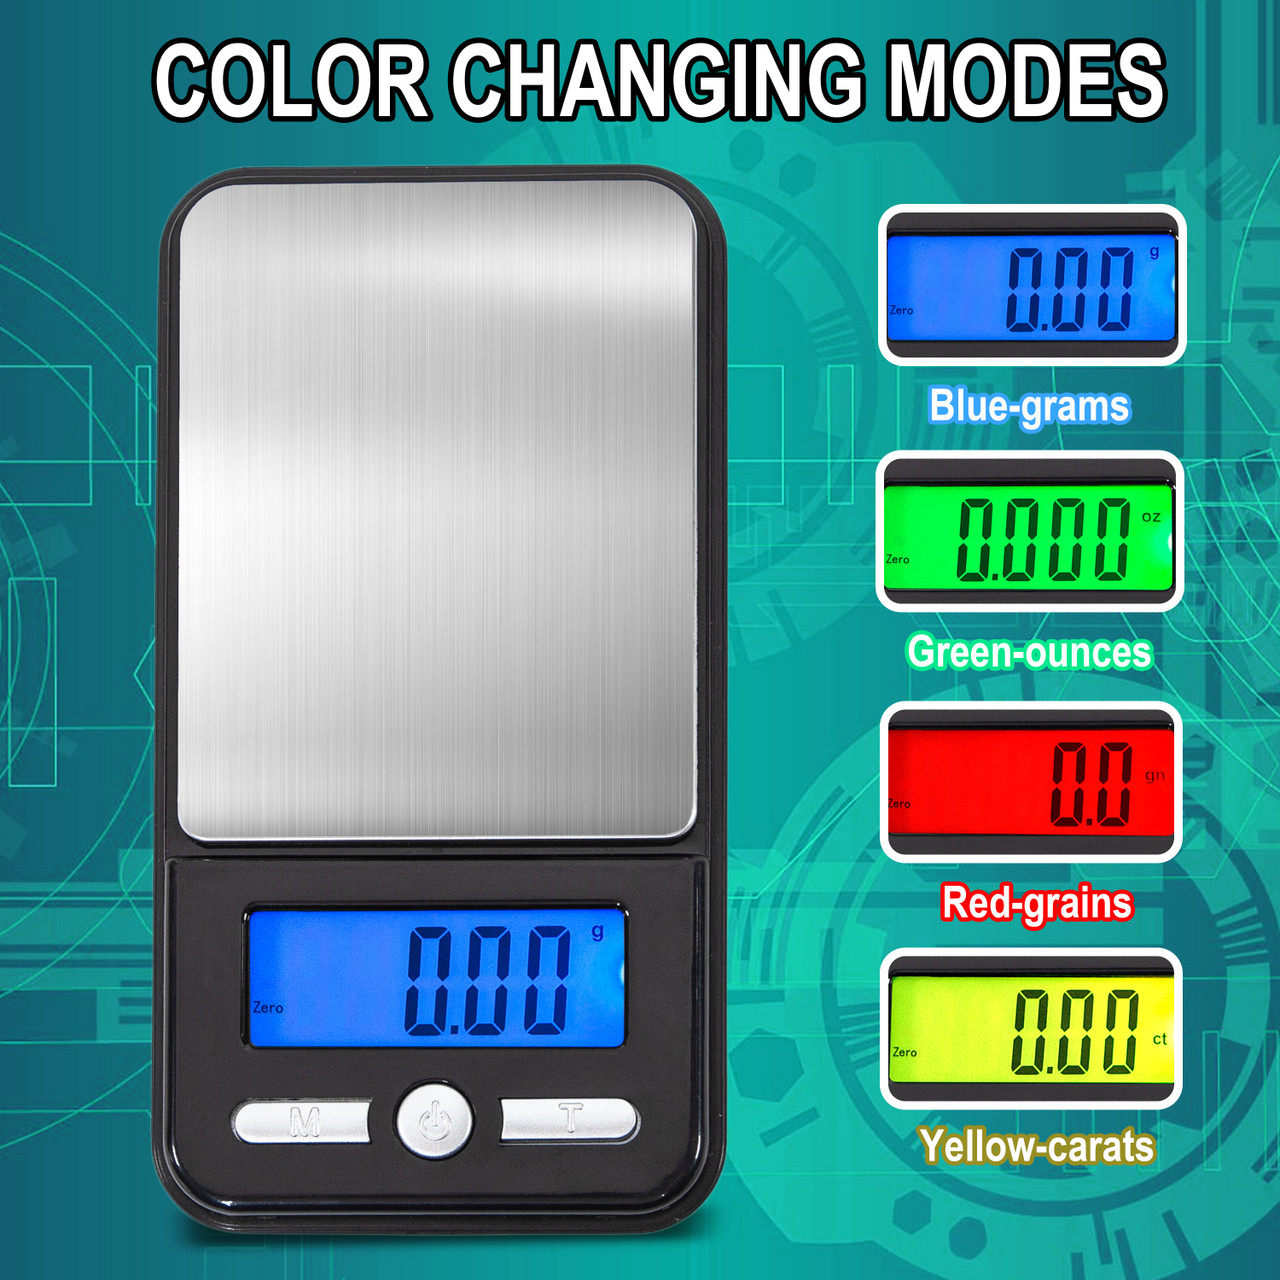  American Weigh Scales AC Series Digital Pocket Weight